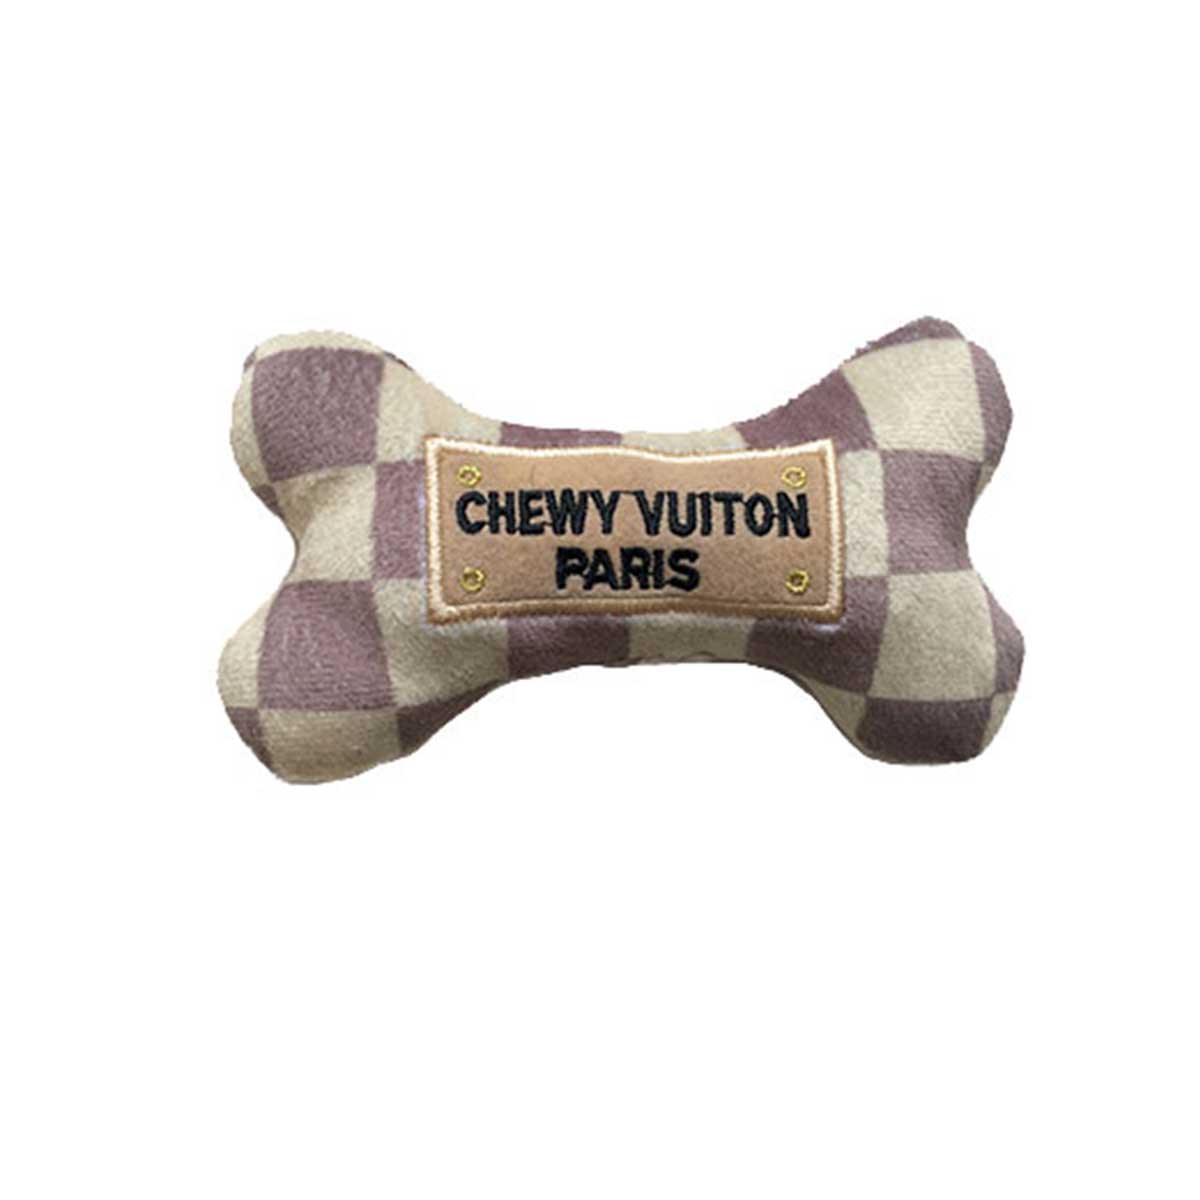 Chewy Vuiton Collection – Pawlicious & Company